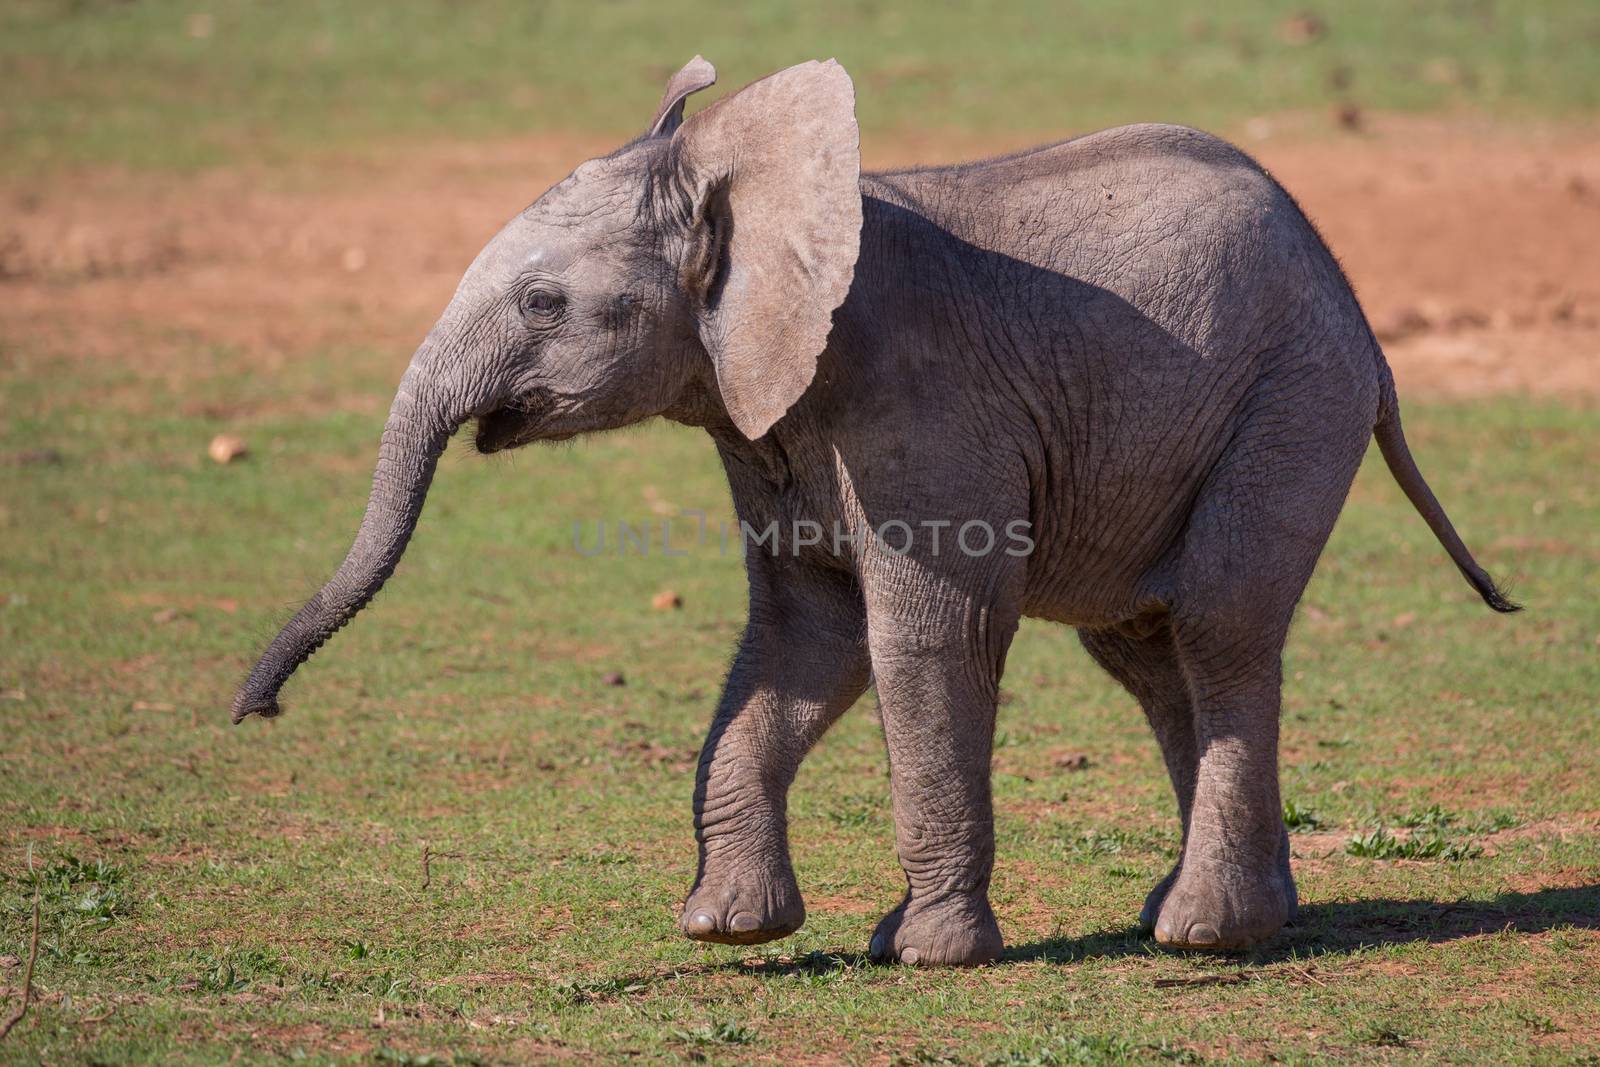 Playful baby African elephnat with wrinkly skin and long trunk